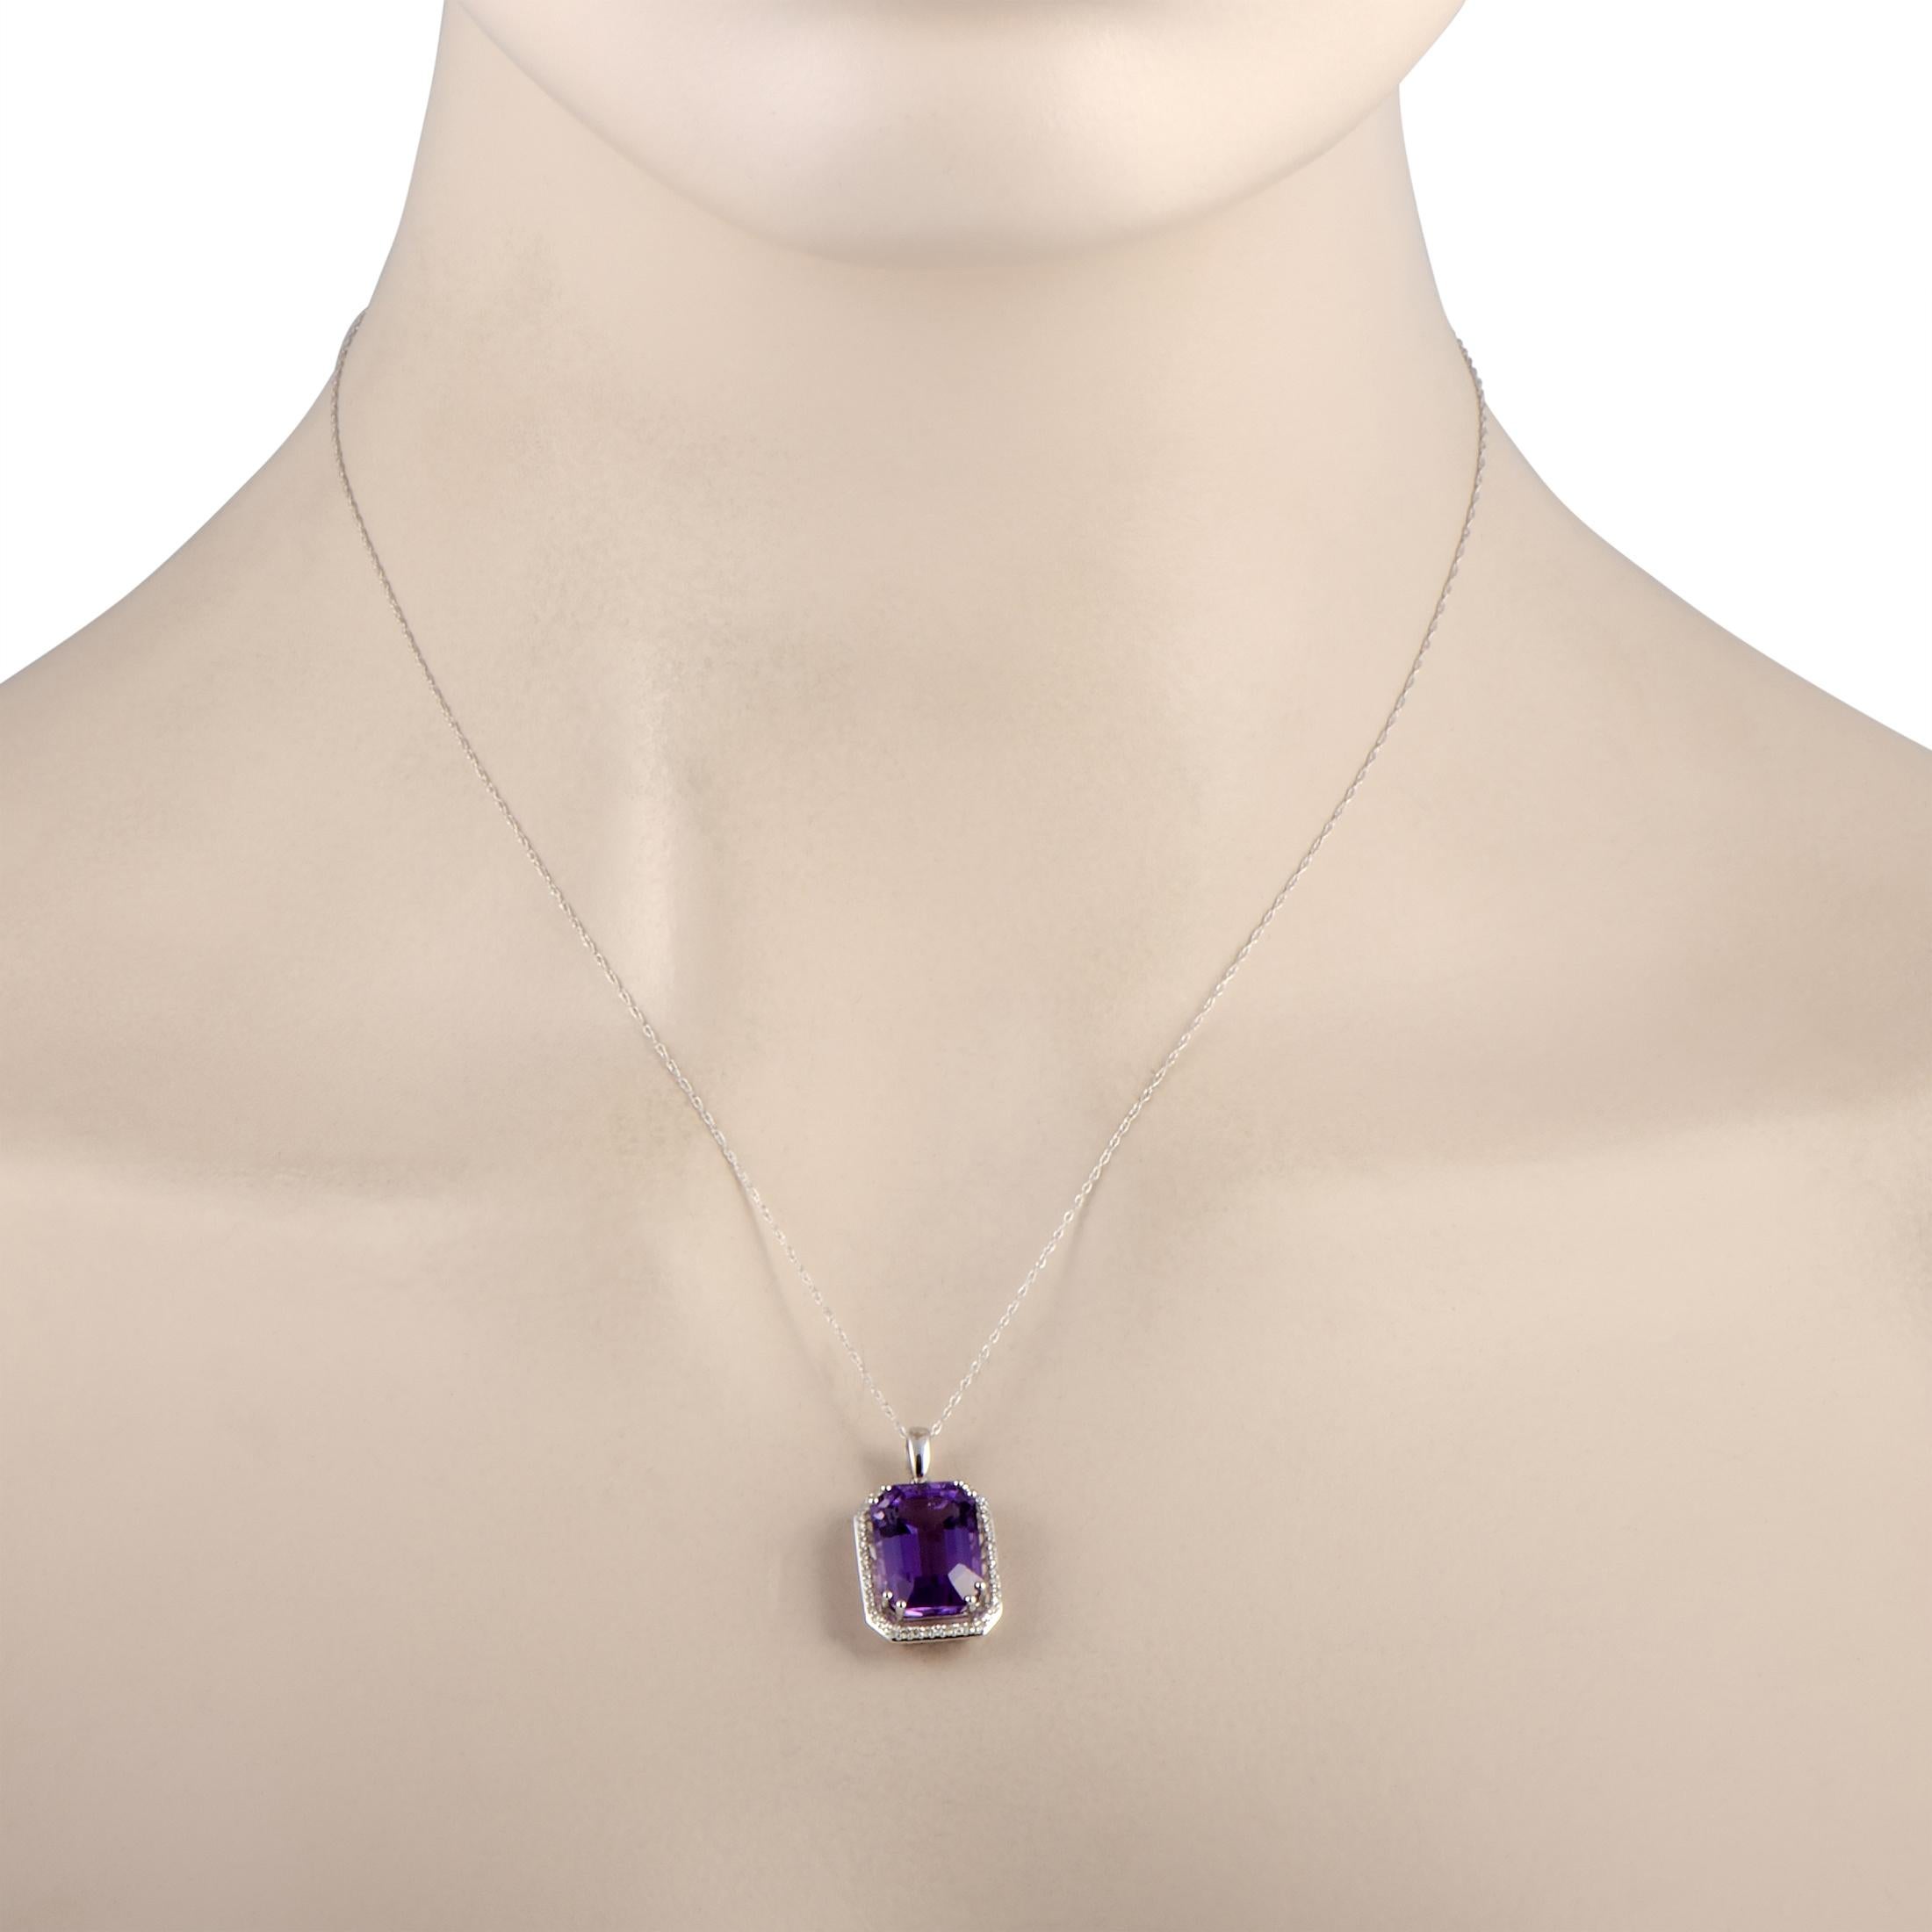 This necklace is made of 14K white gold and weighs 4.7 grams, boasting an 18.00” long chain and a 0.90” by 0.50” pendant. The necklace is set with an amethyst and with a total of 0.20 carats of diamonds.
 
 Offered in brand new condition, this item